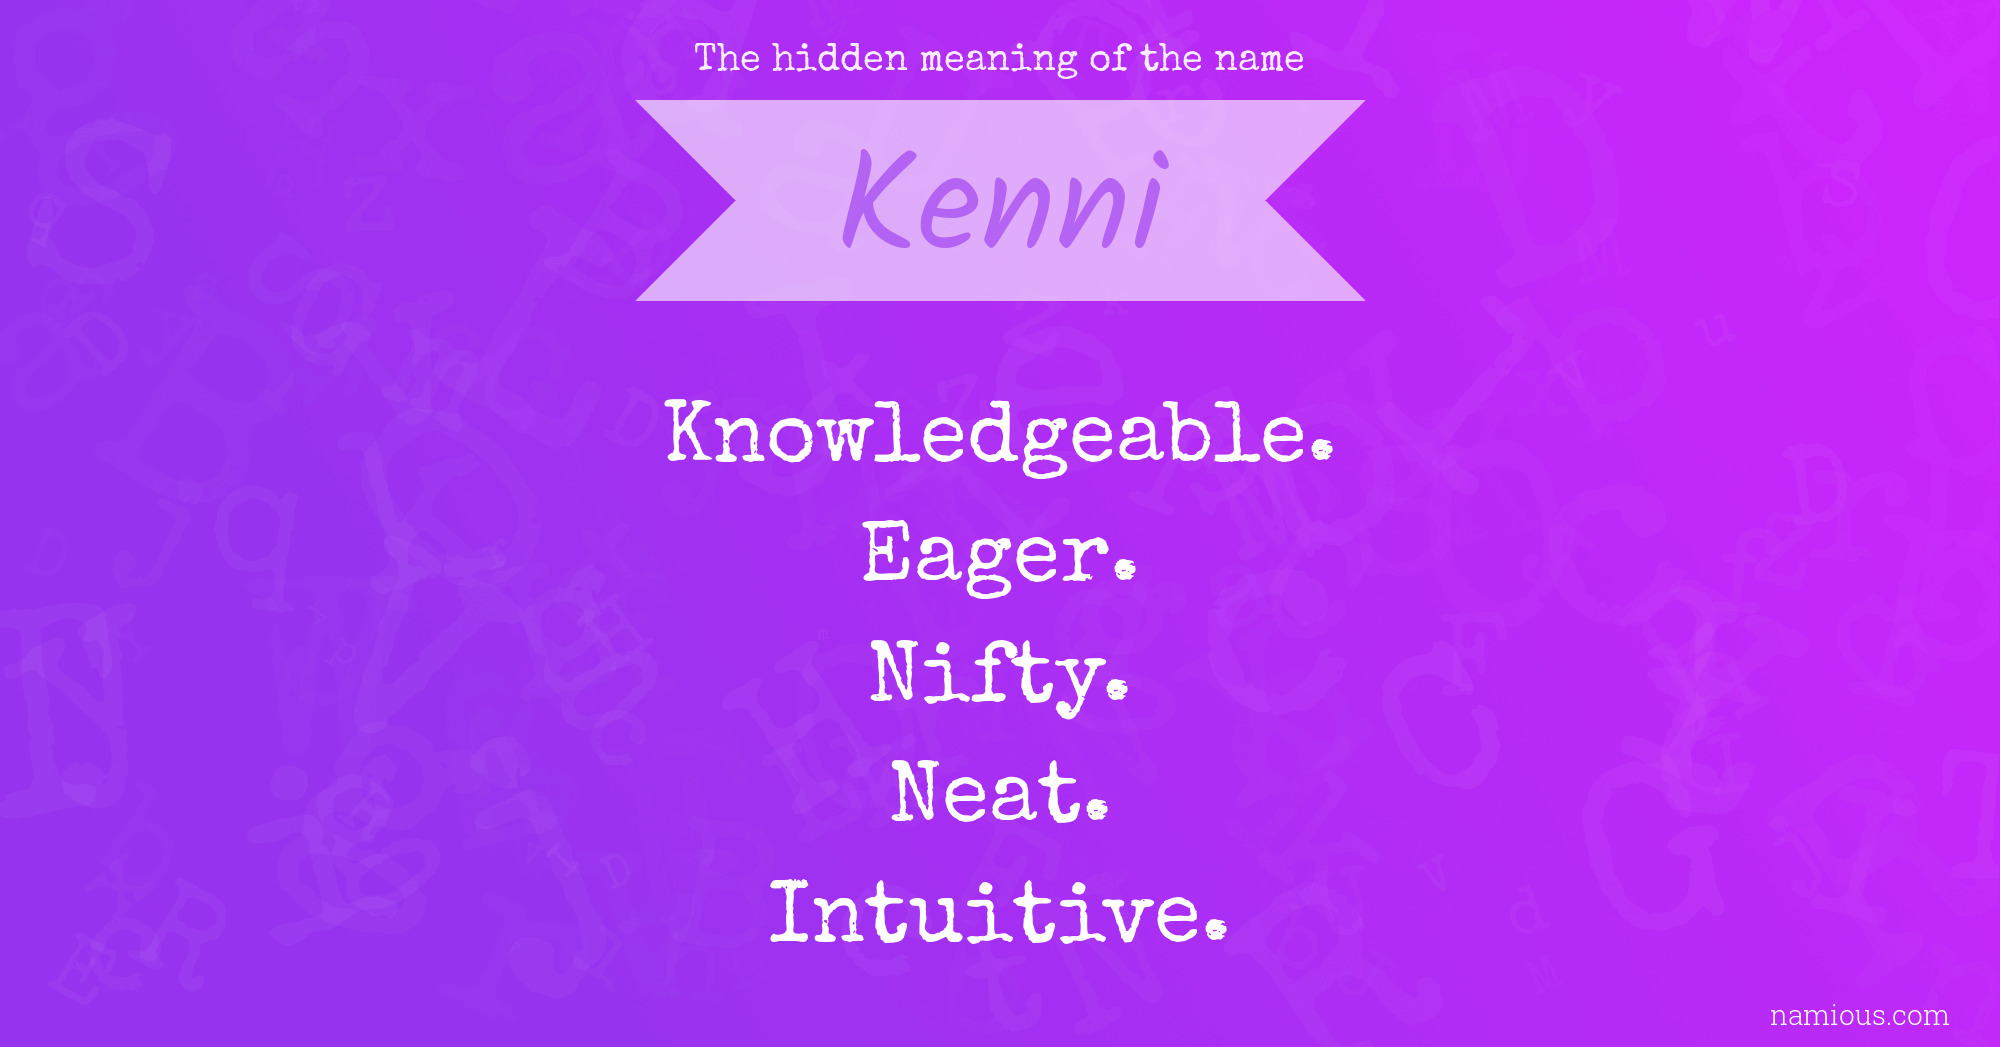 The hidden meaning of the name Kenni